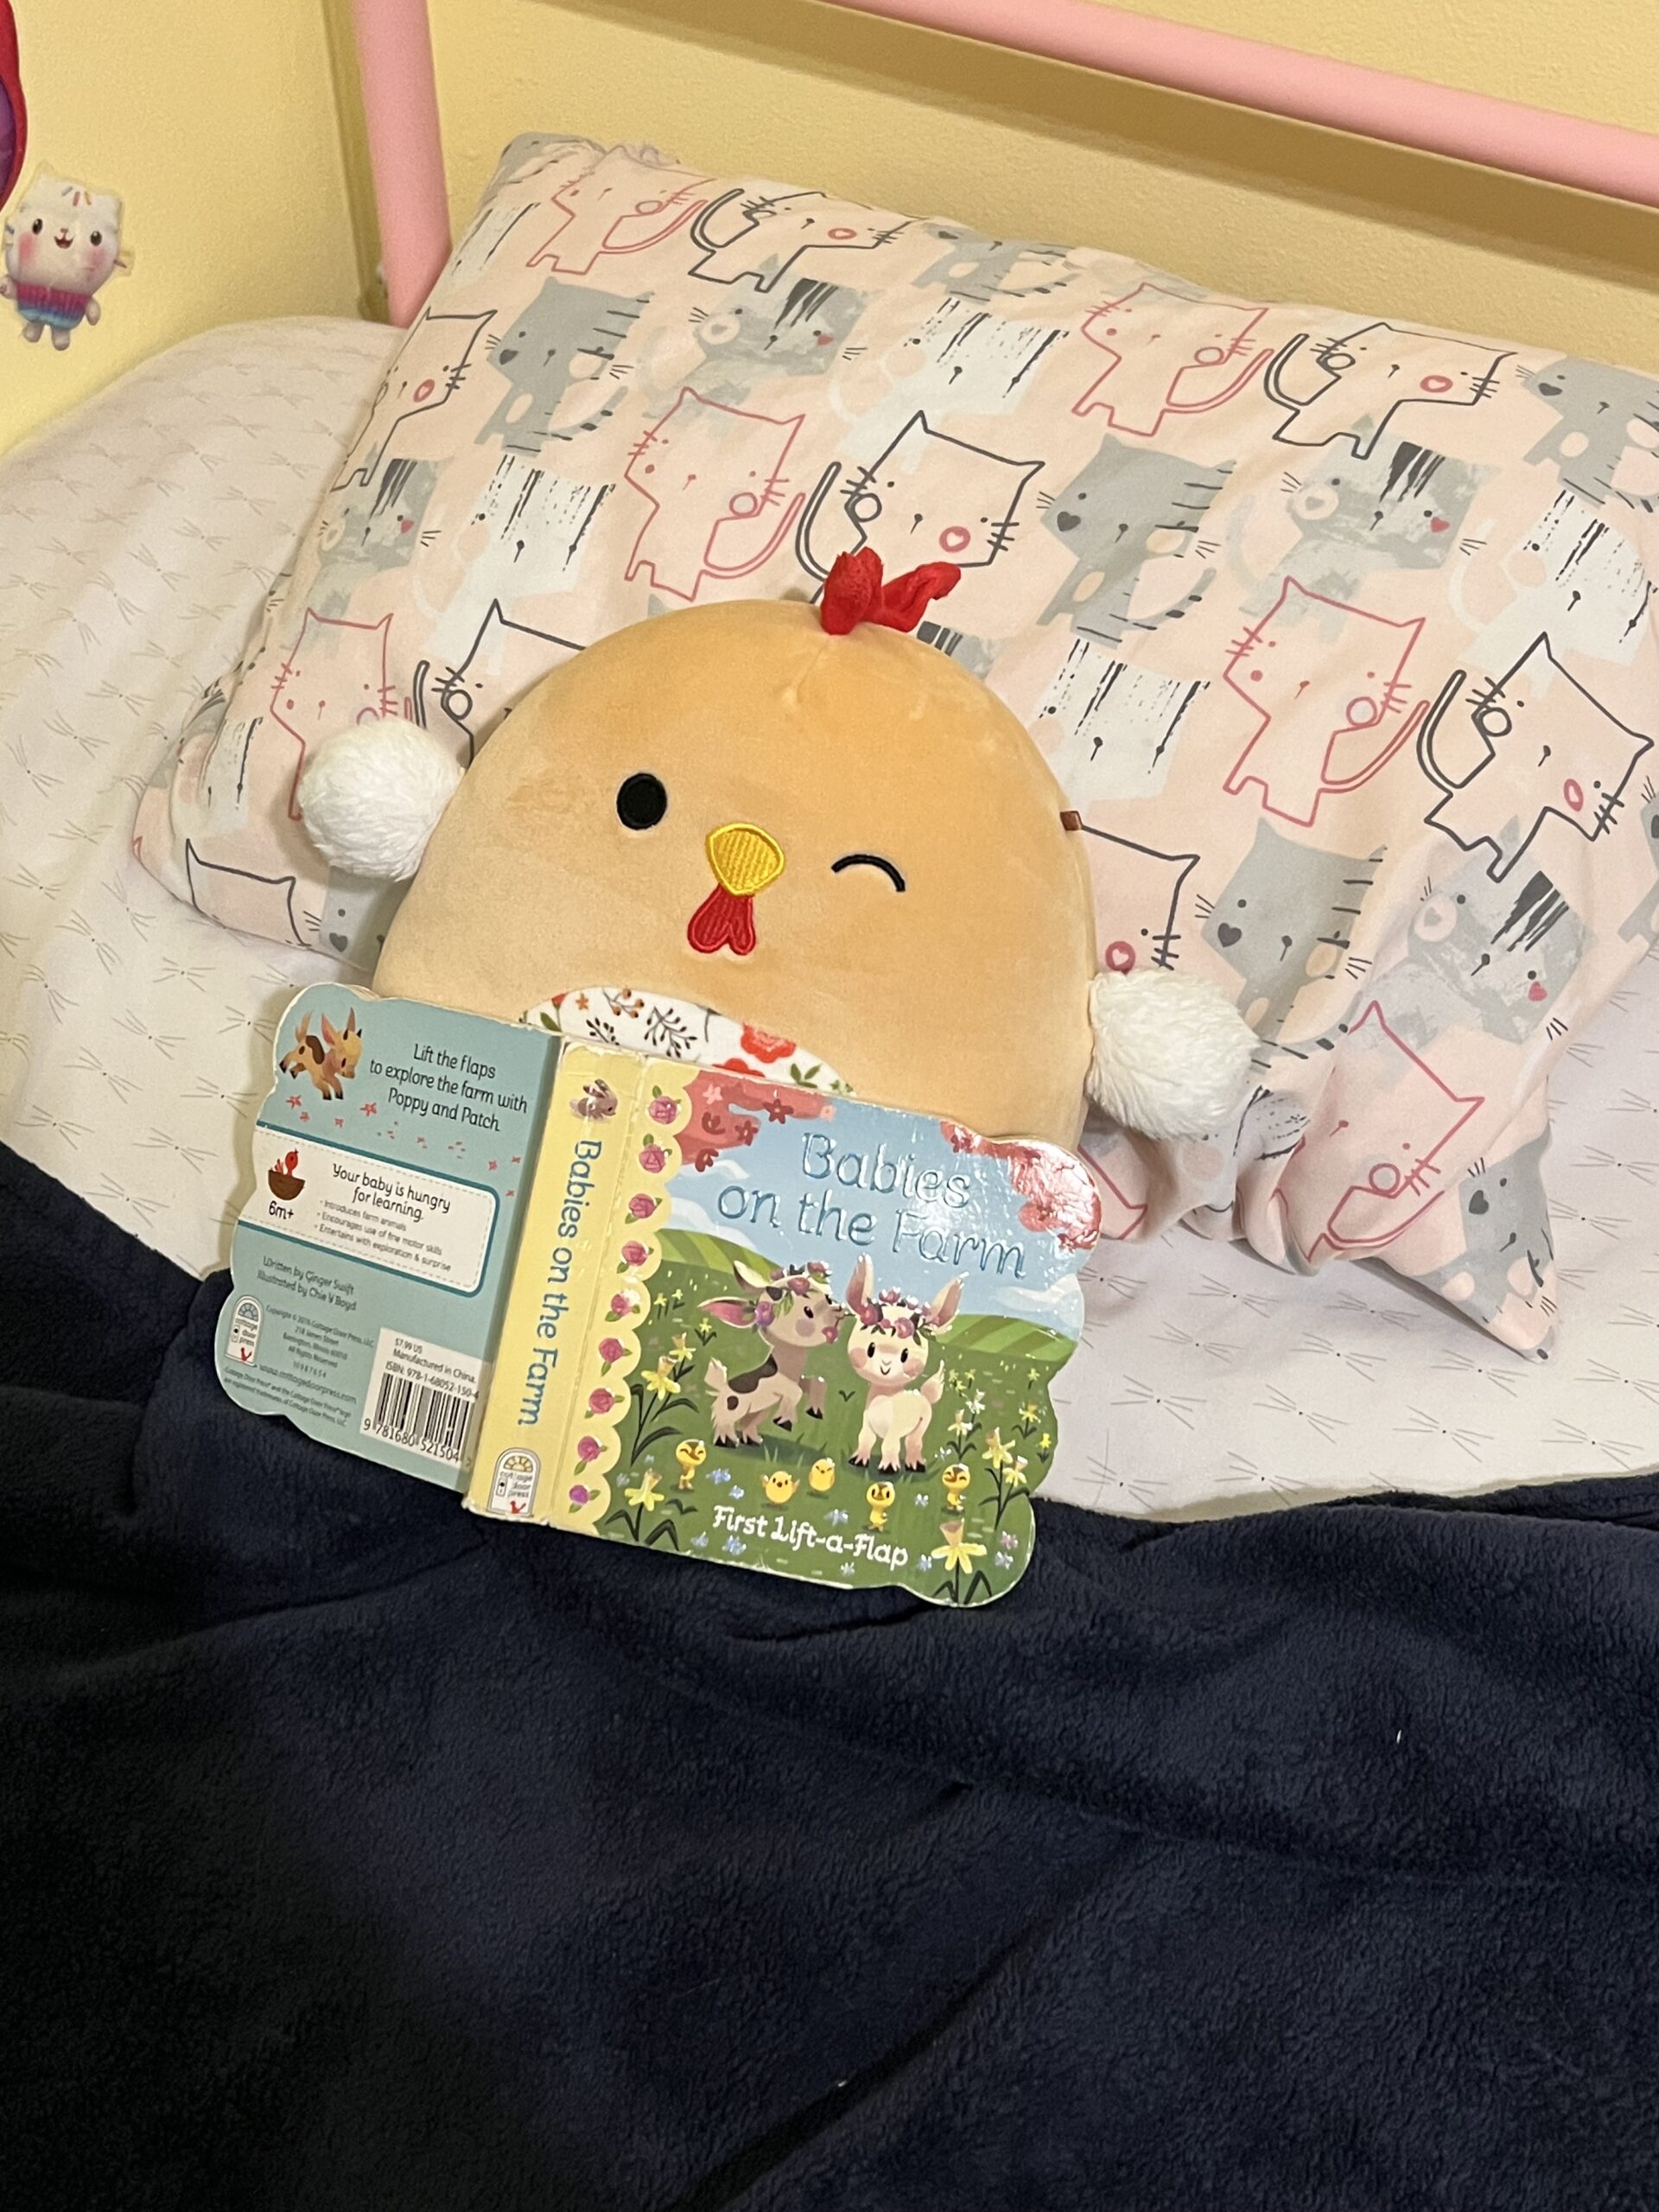 Stuffed Animal with a book, the kids are all right